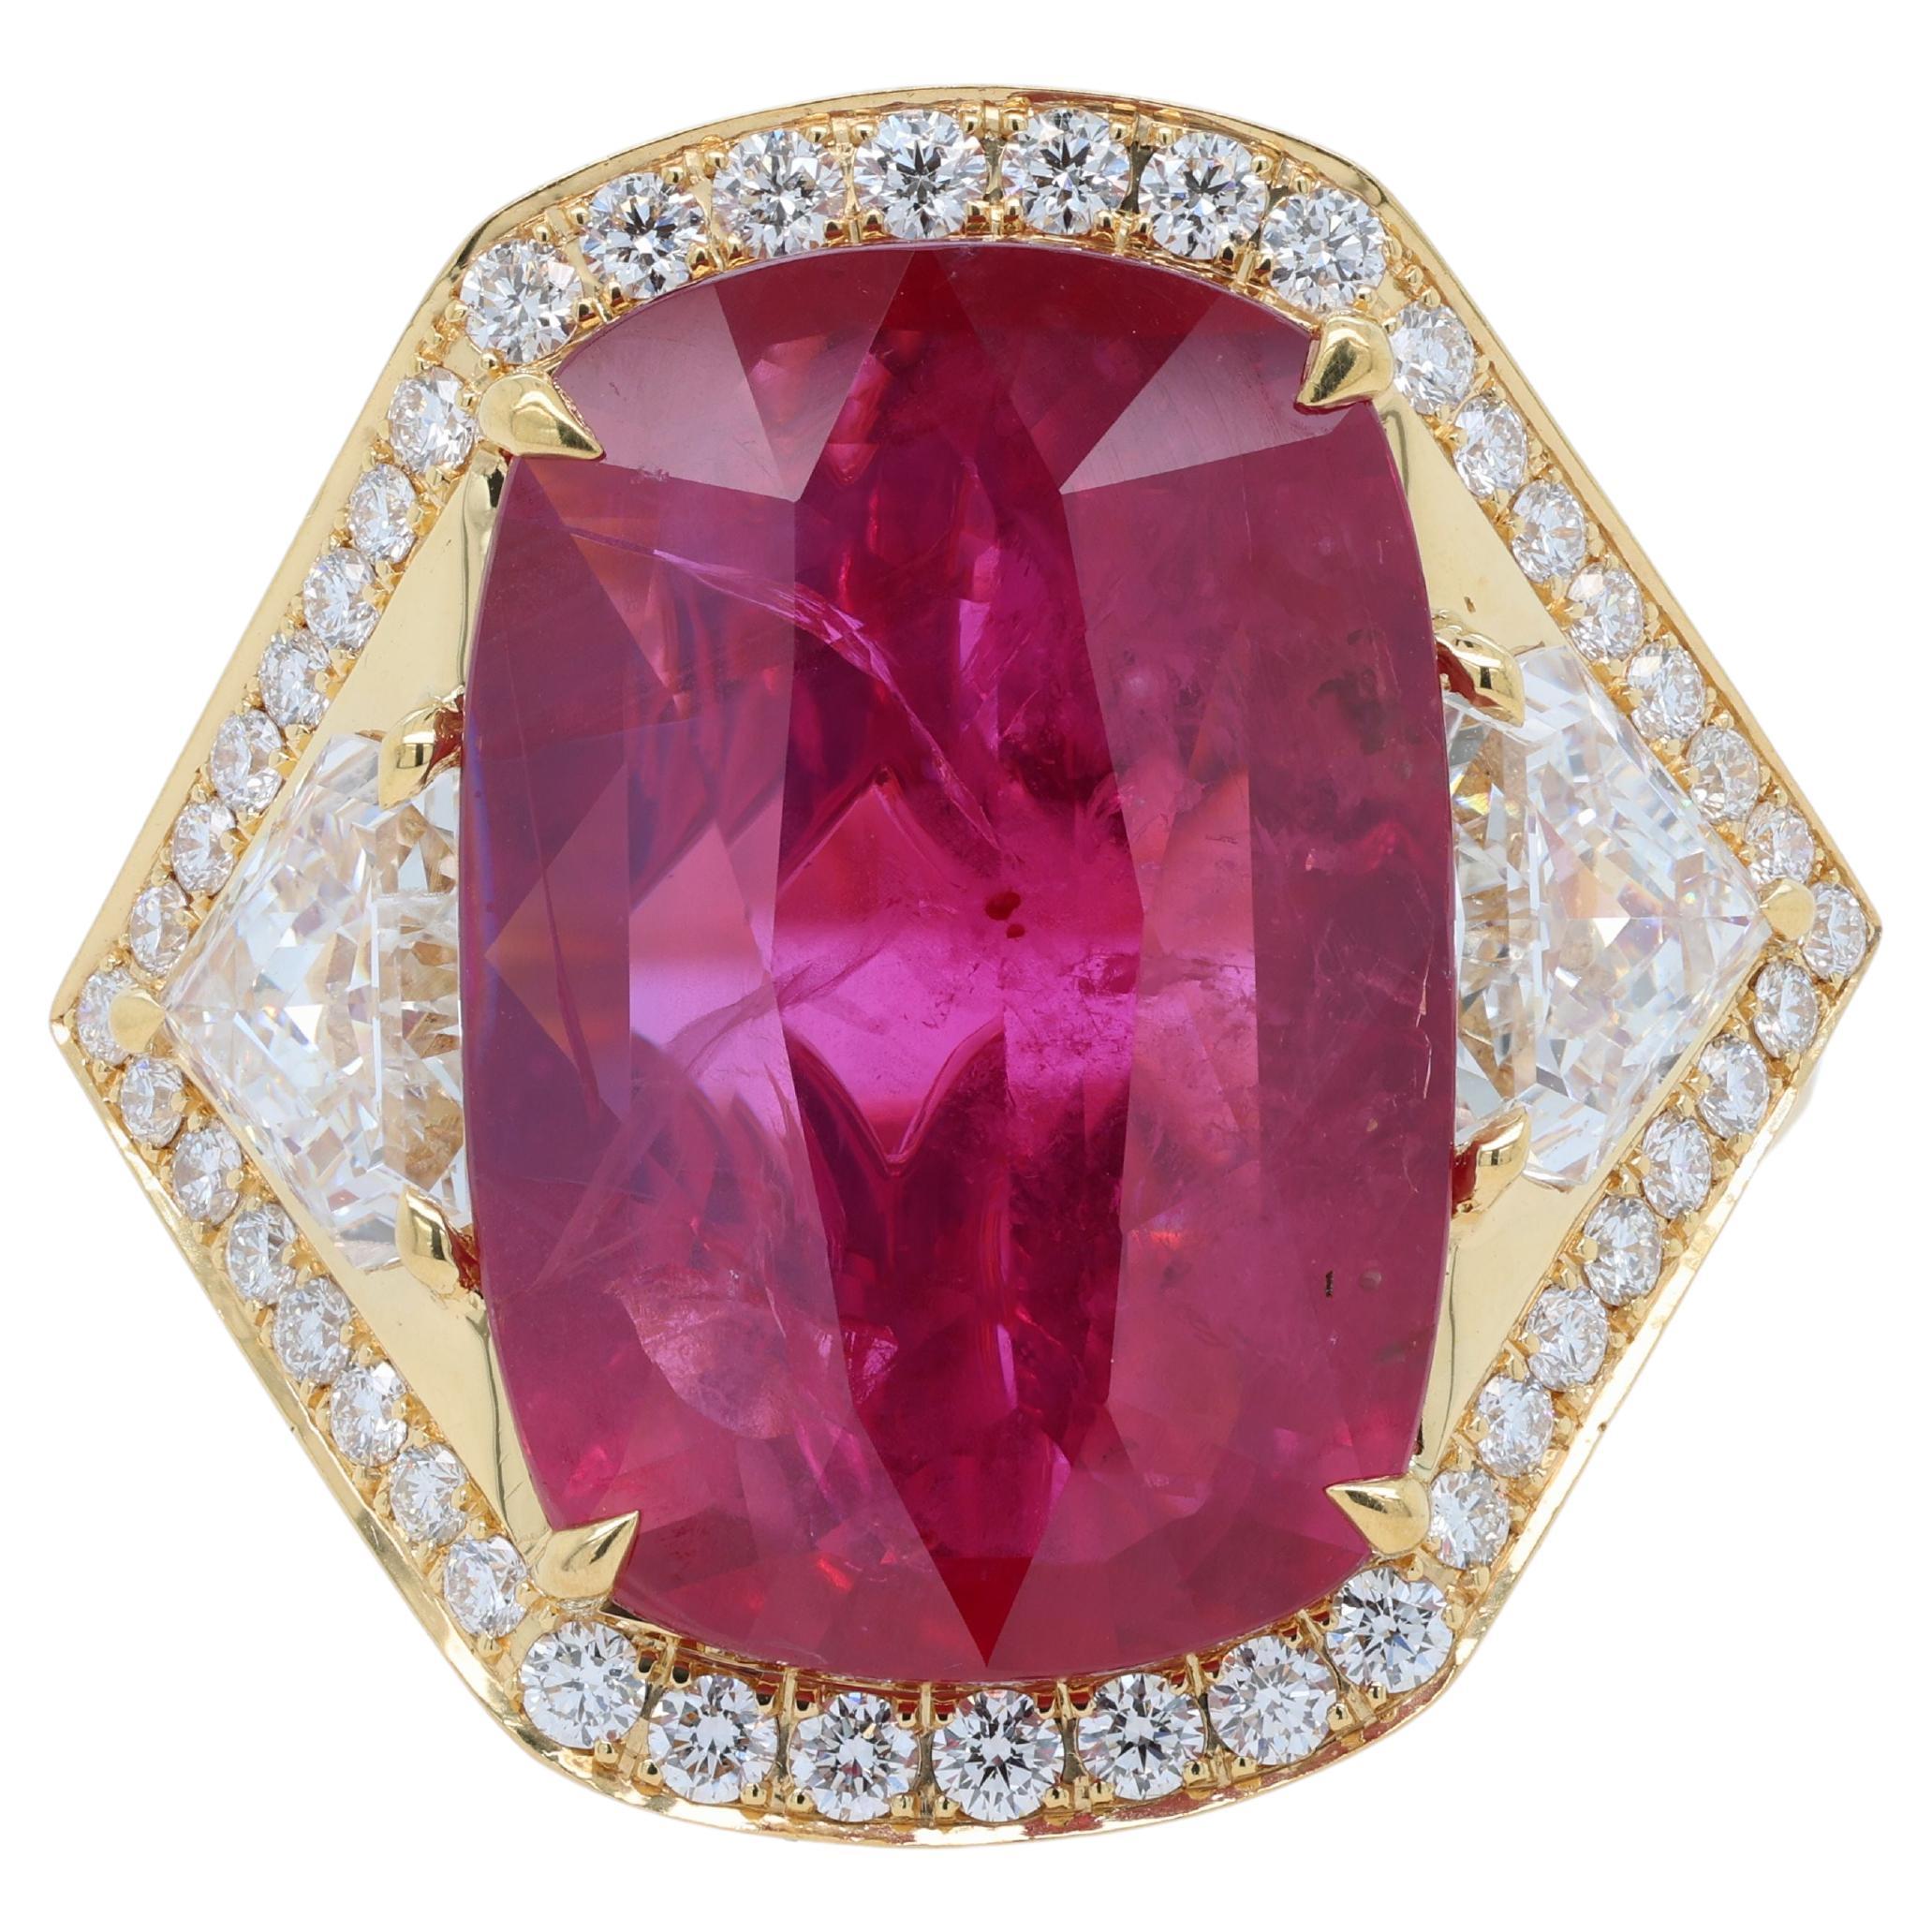 This 18 karat ruby ring features a captivating 10.01 carat GRS-certified Pigeon Blood Red ruby as its centerpiece, encircled by 2.00 carats of sparkling diamonds.